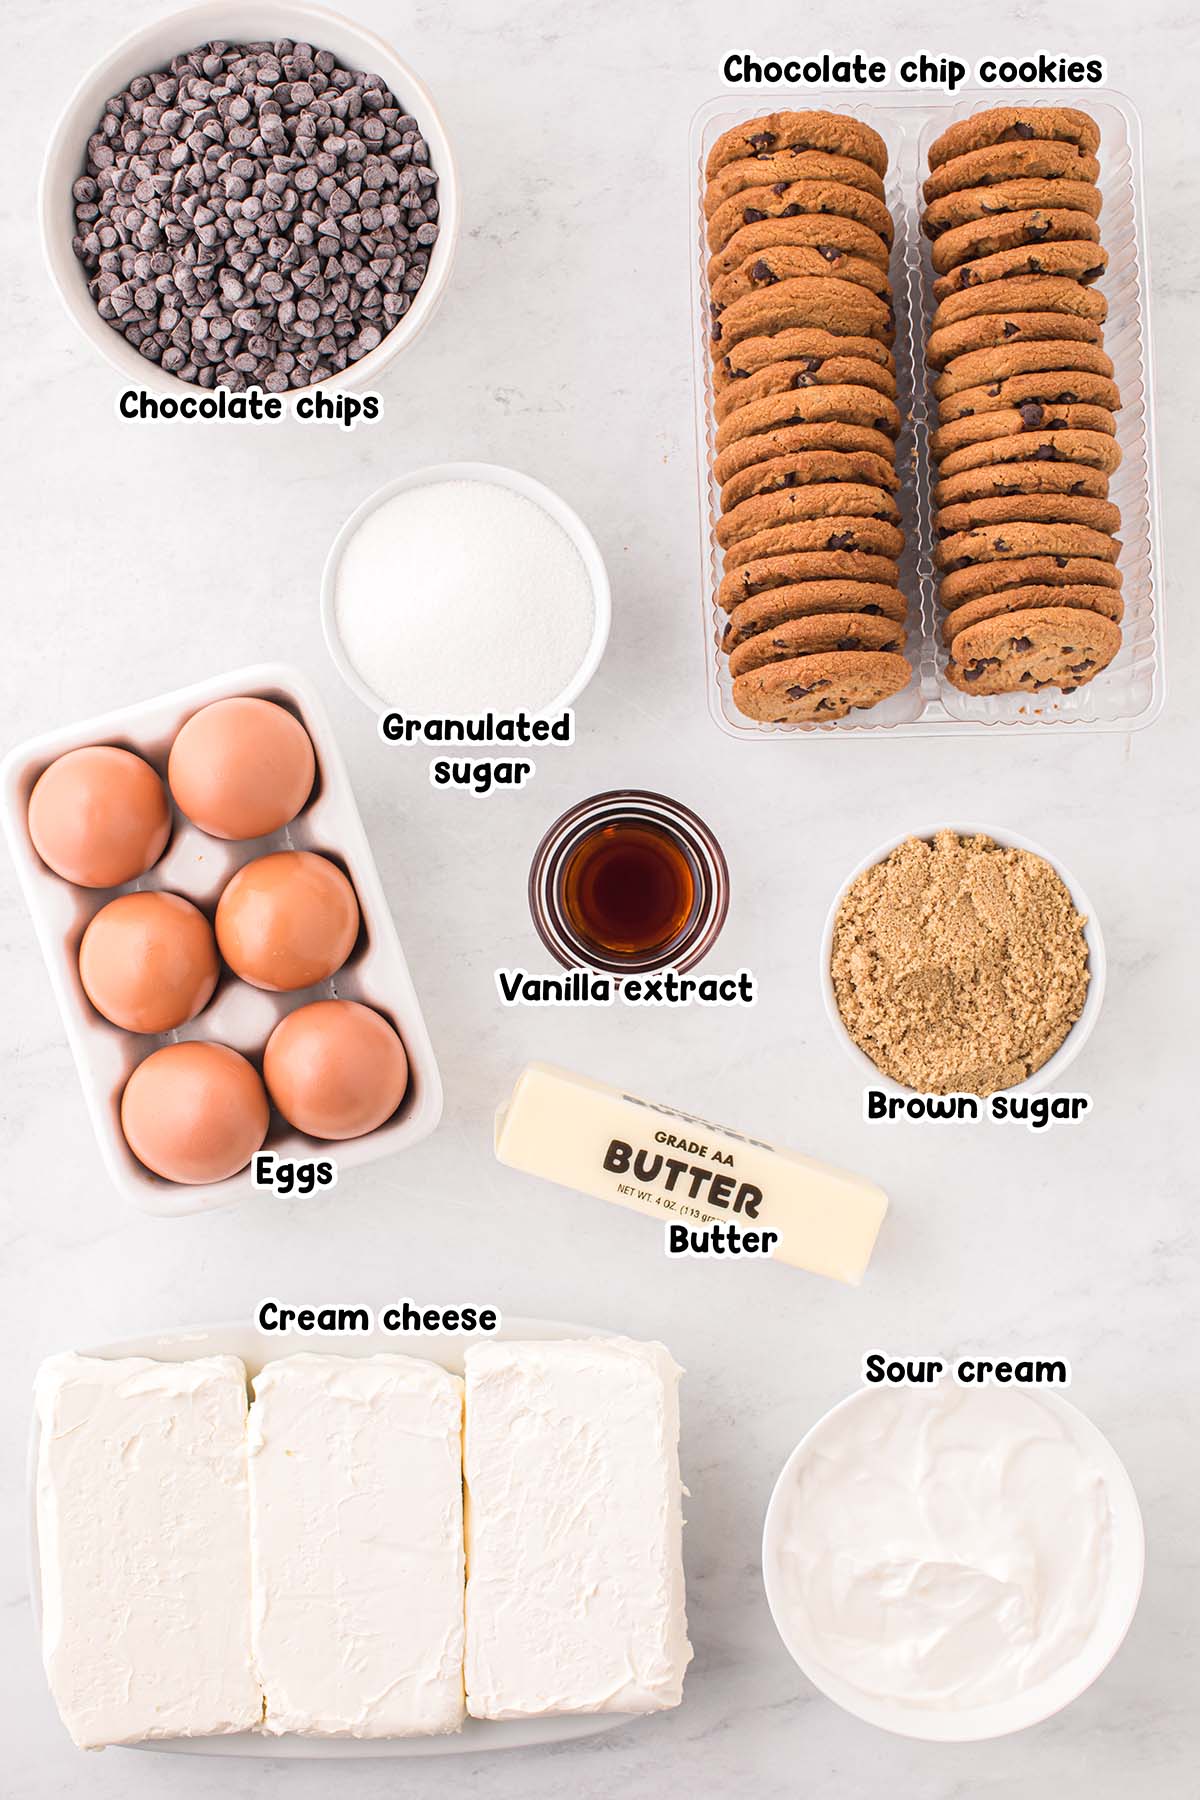 Chocolate Chip Cheesecake ingredients.